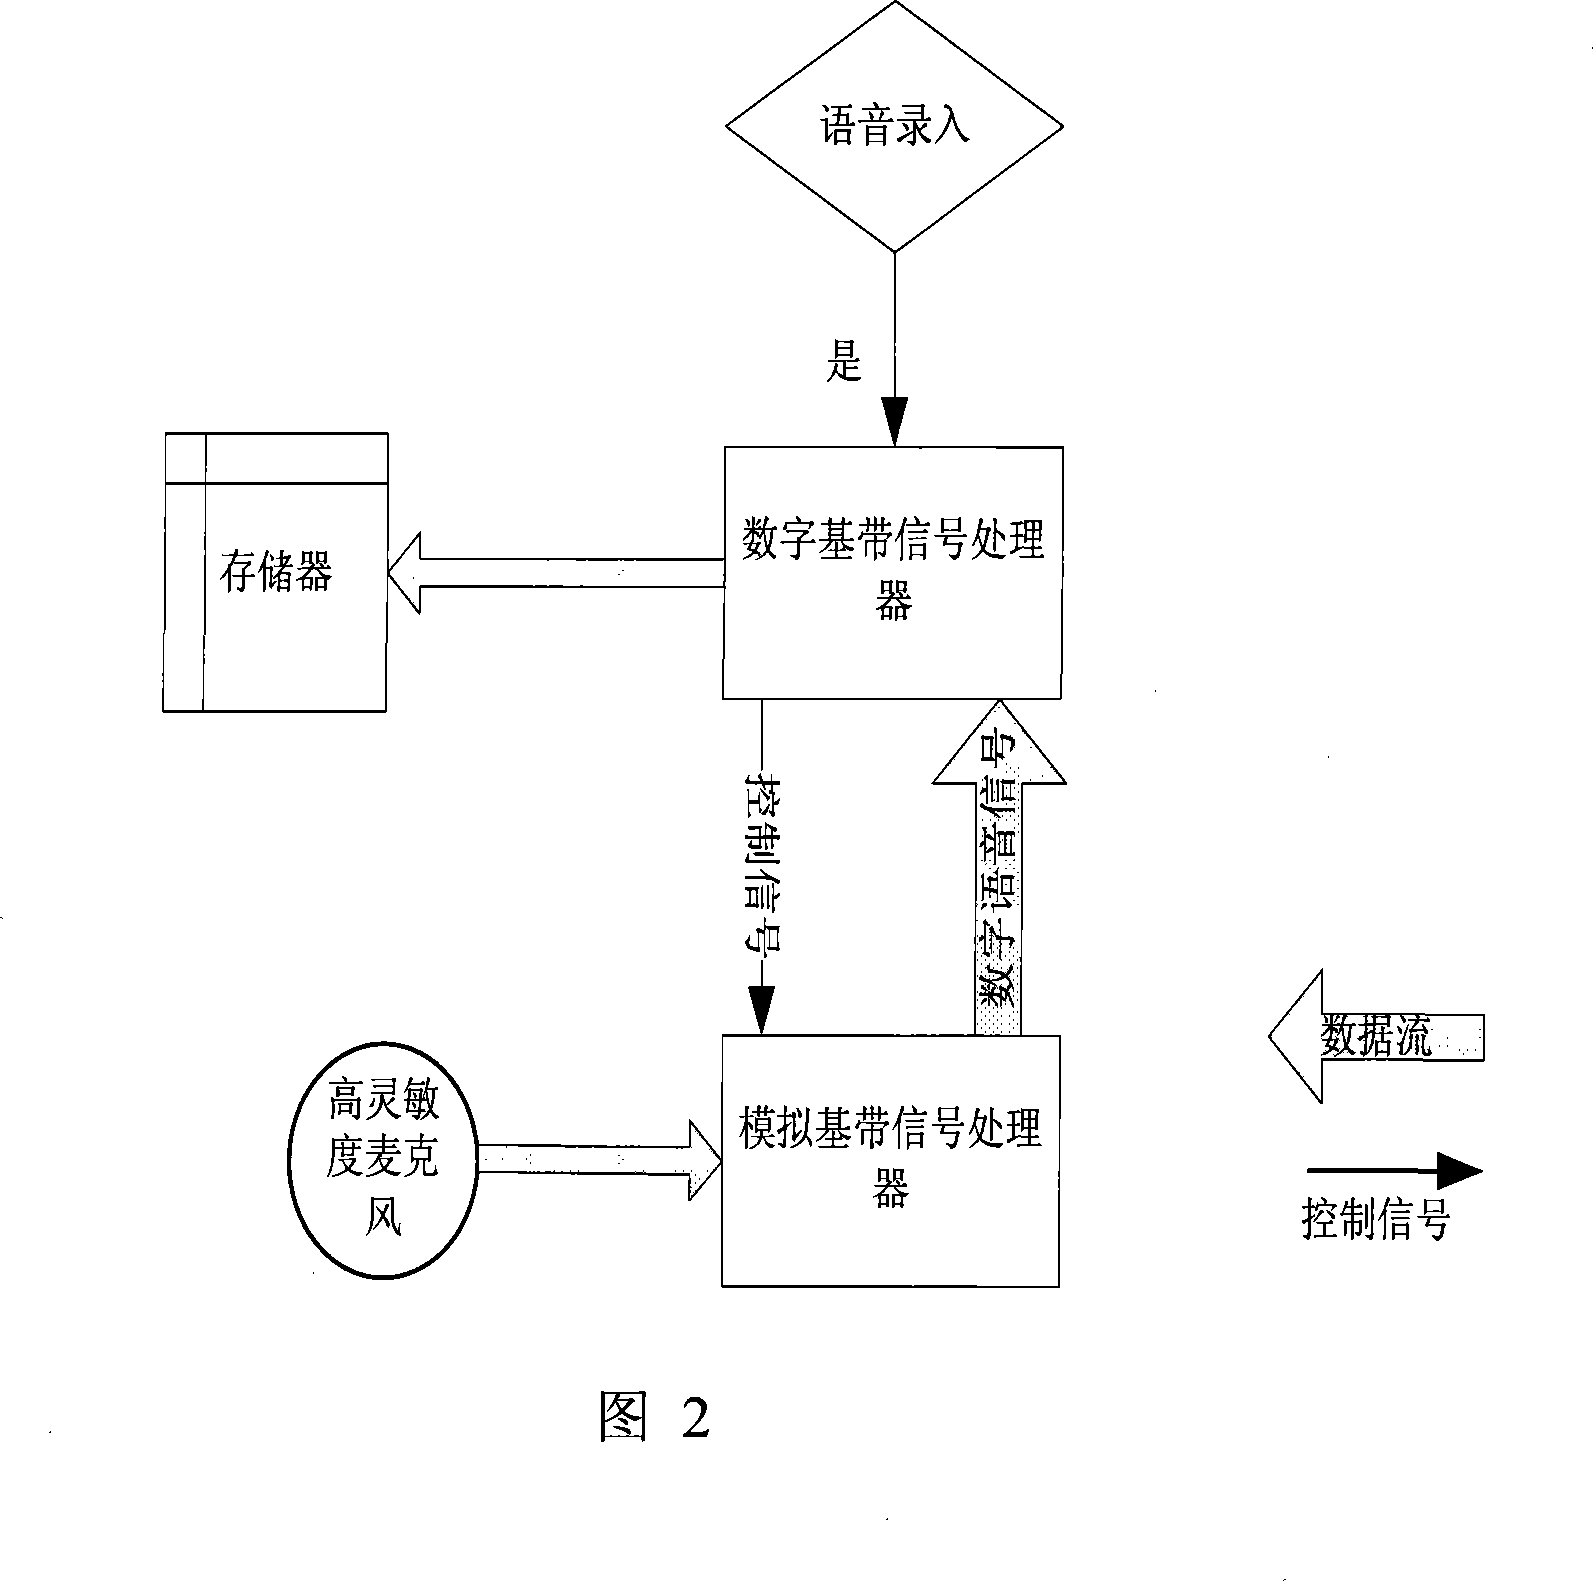 A system and method for voice control STB